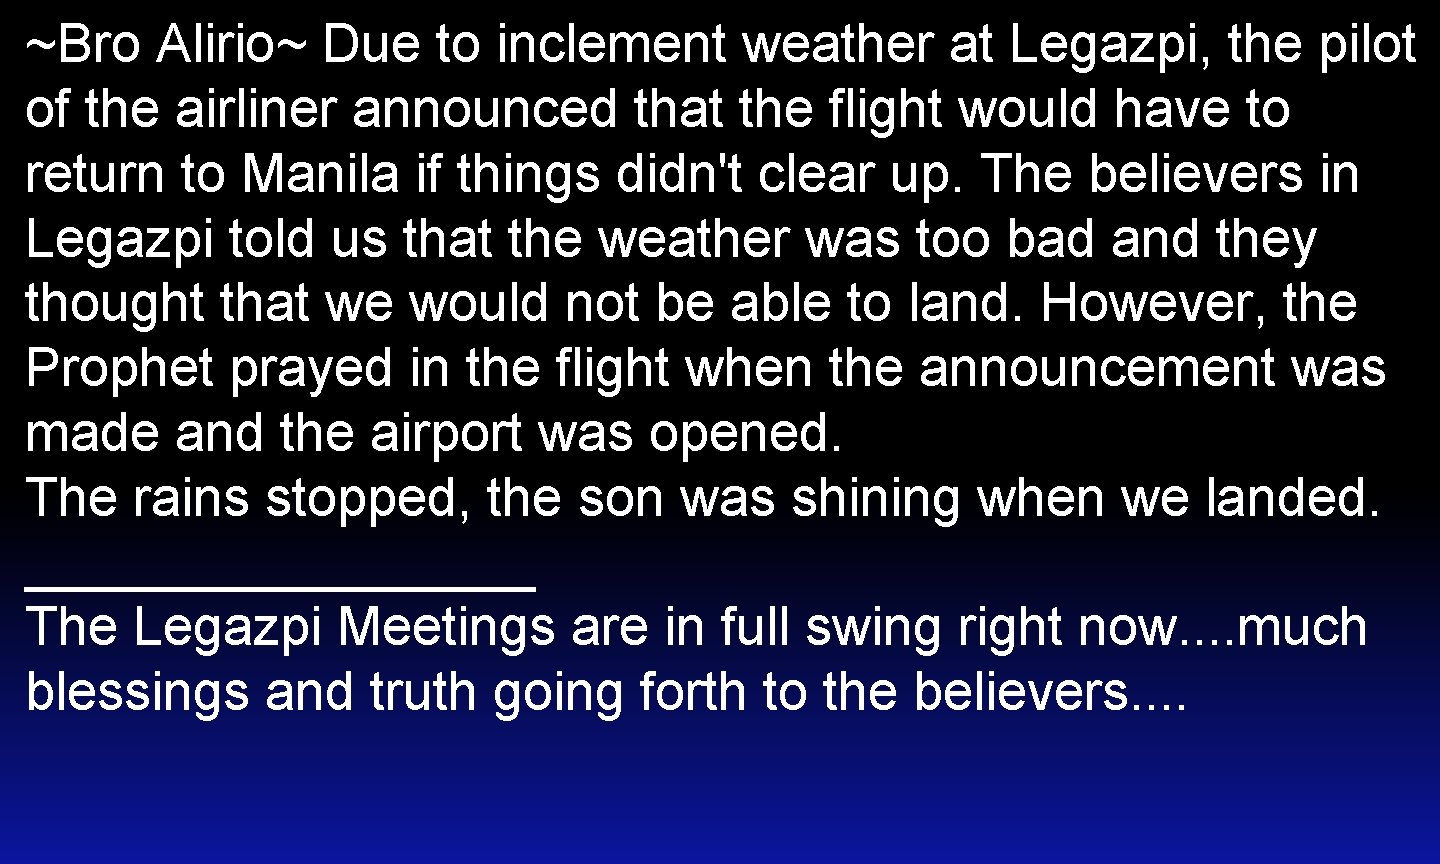 ~Bro Alirio~ Due to inclement weather at Legazpi, the pilot of the airliner announced